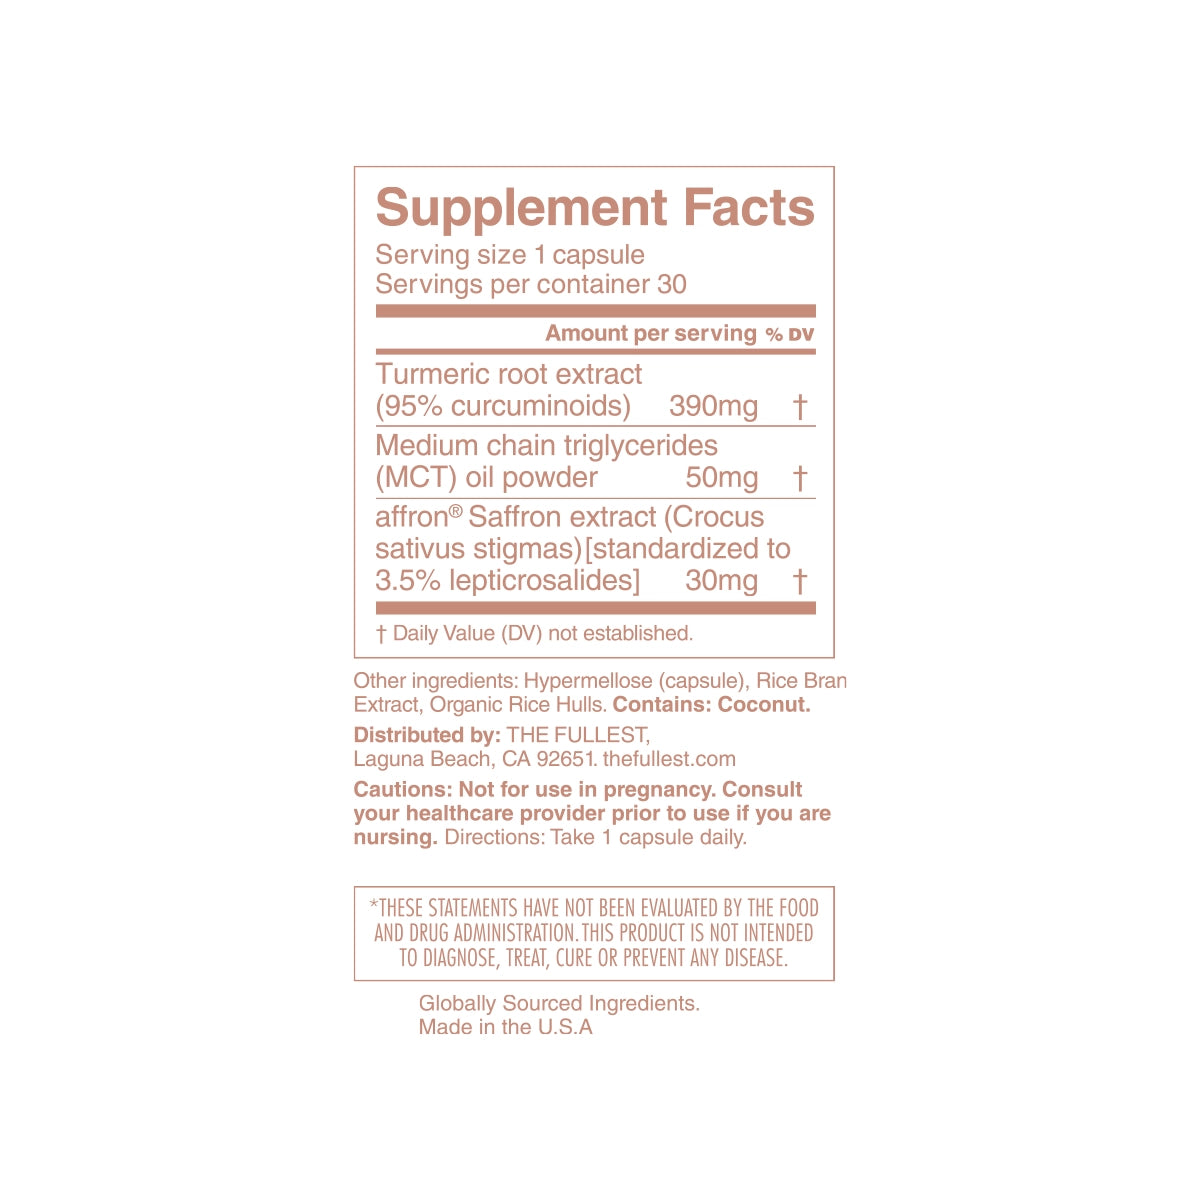 Kinder Thoughts mood-boosting nutritional supplement label with serving size, ingredients, and manufacturer details by THE FULLEST.